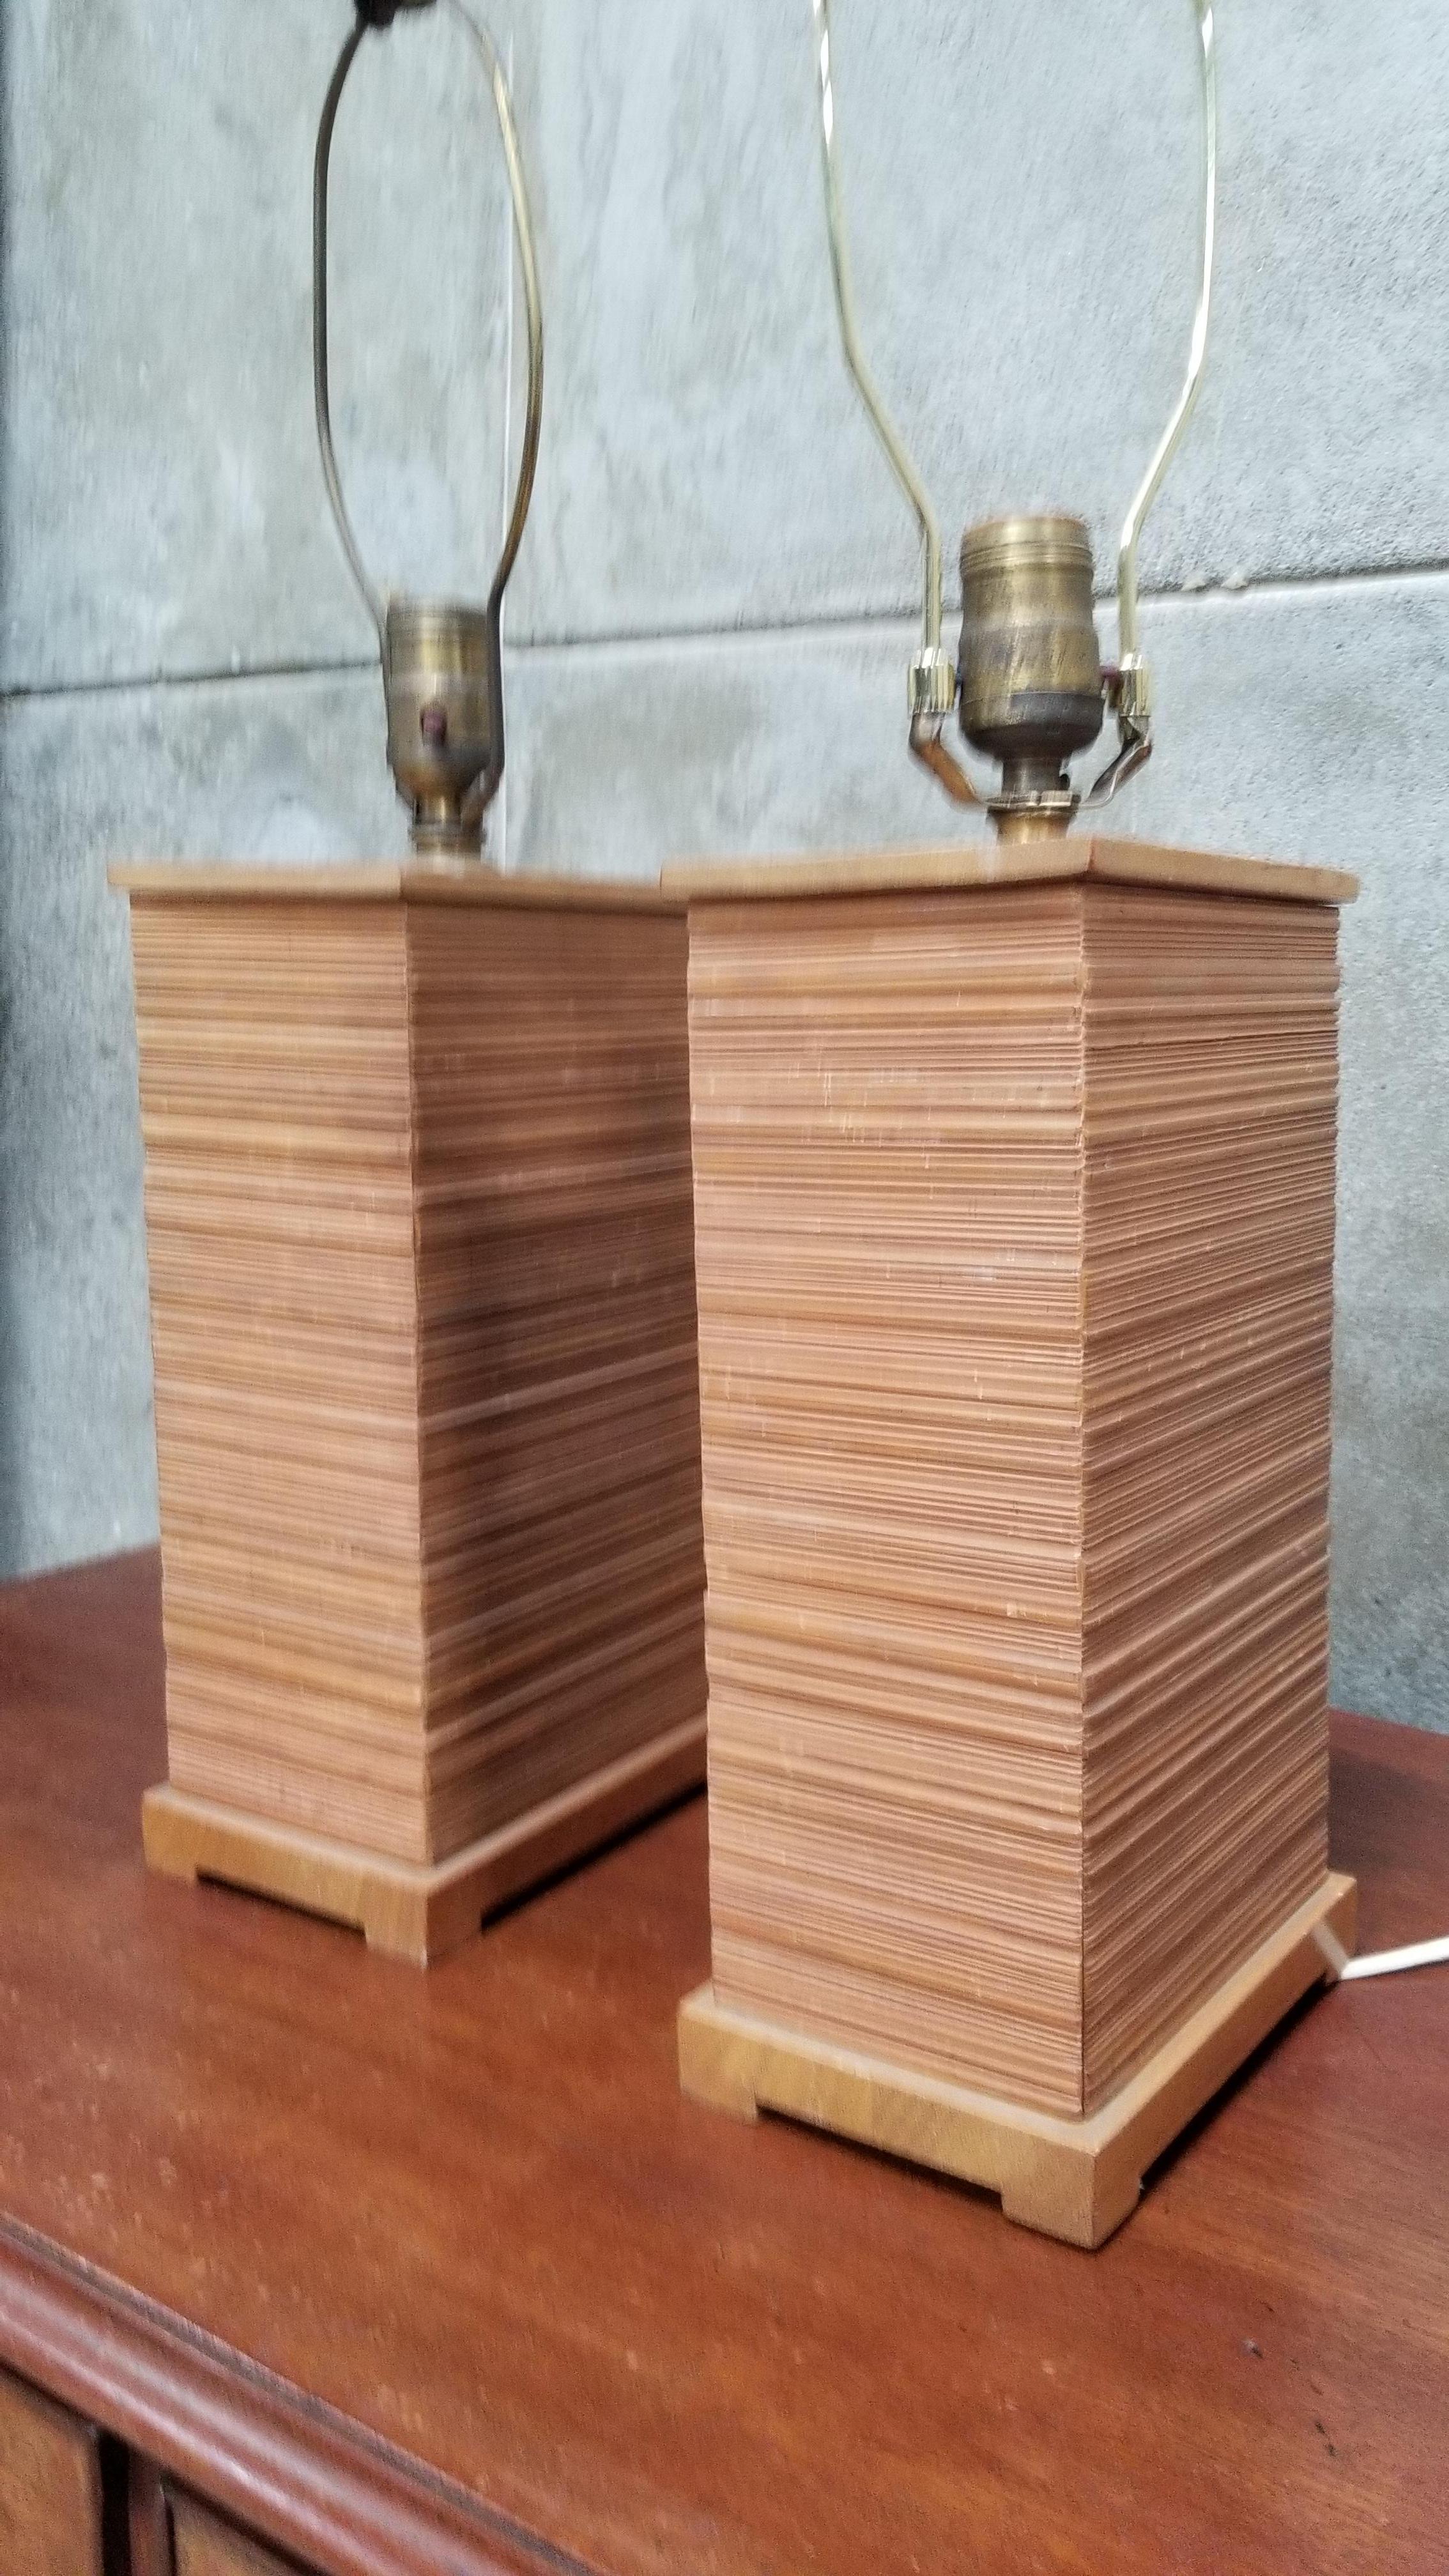 American Paul Frankl Combed Fir Table Lamps, a Pair For Sale